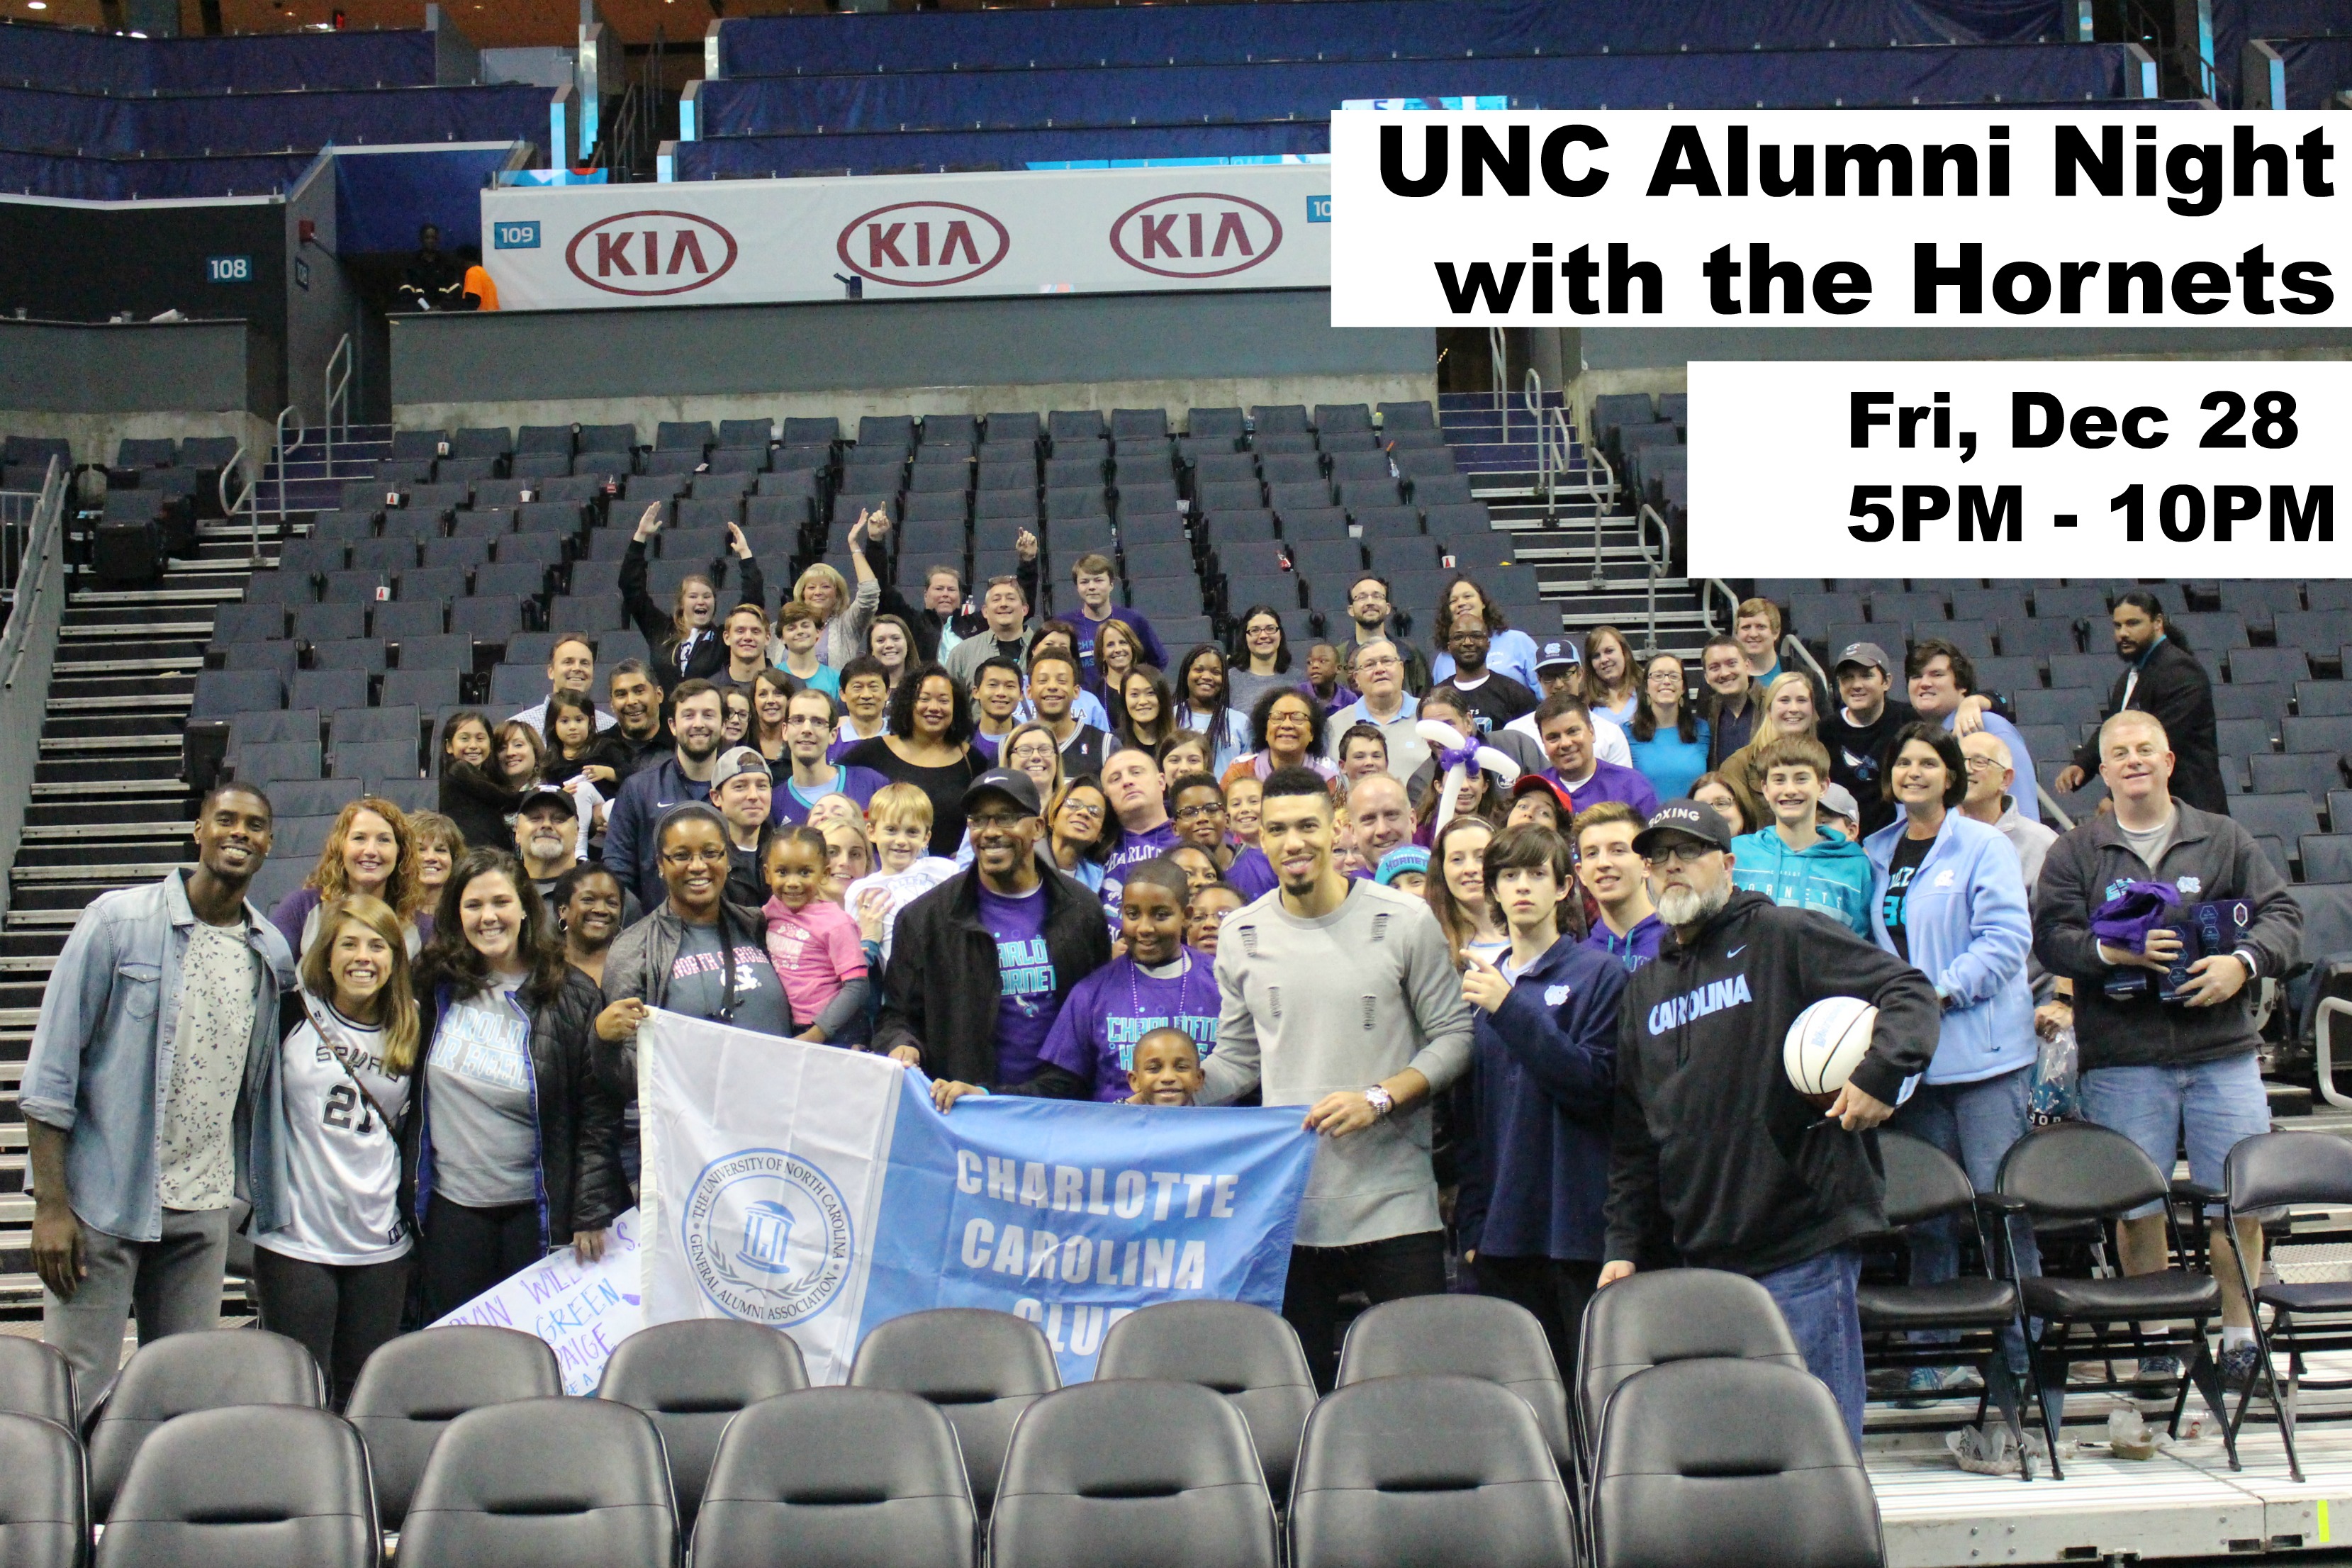 UNC Alumni Night with the Hornets: Hornets v Nets (Dec 28)